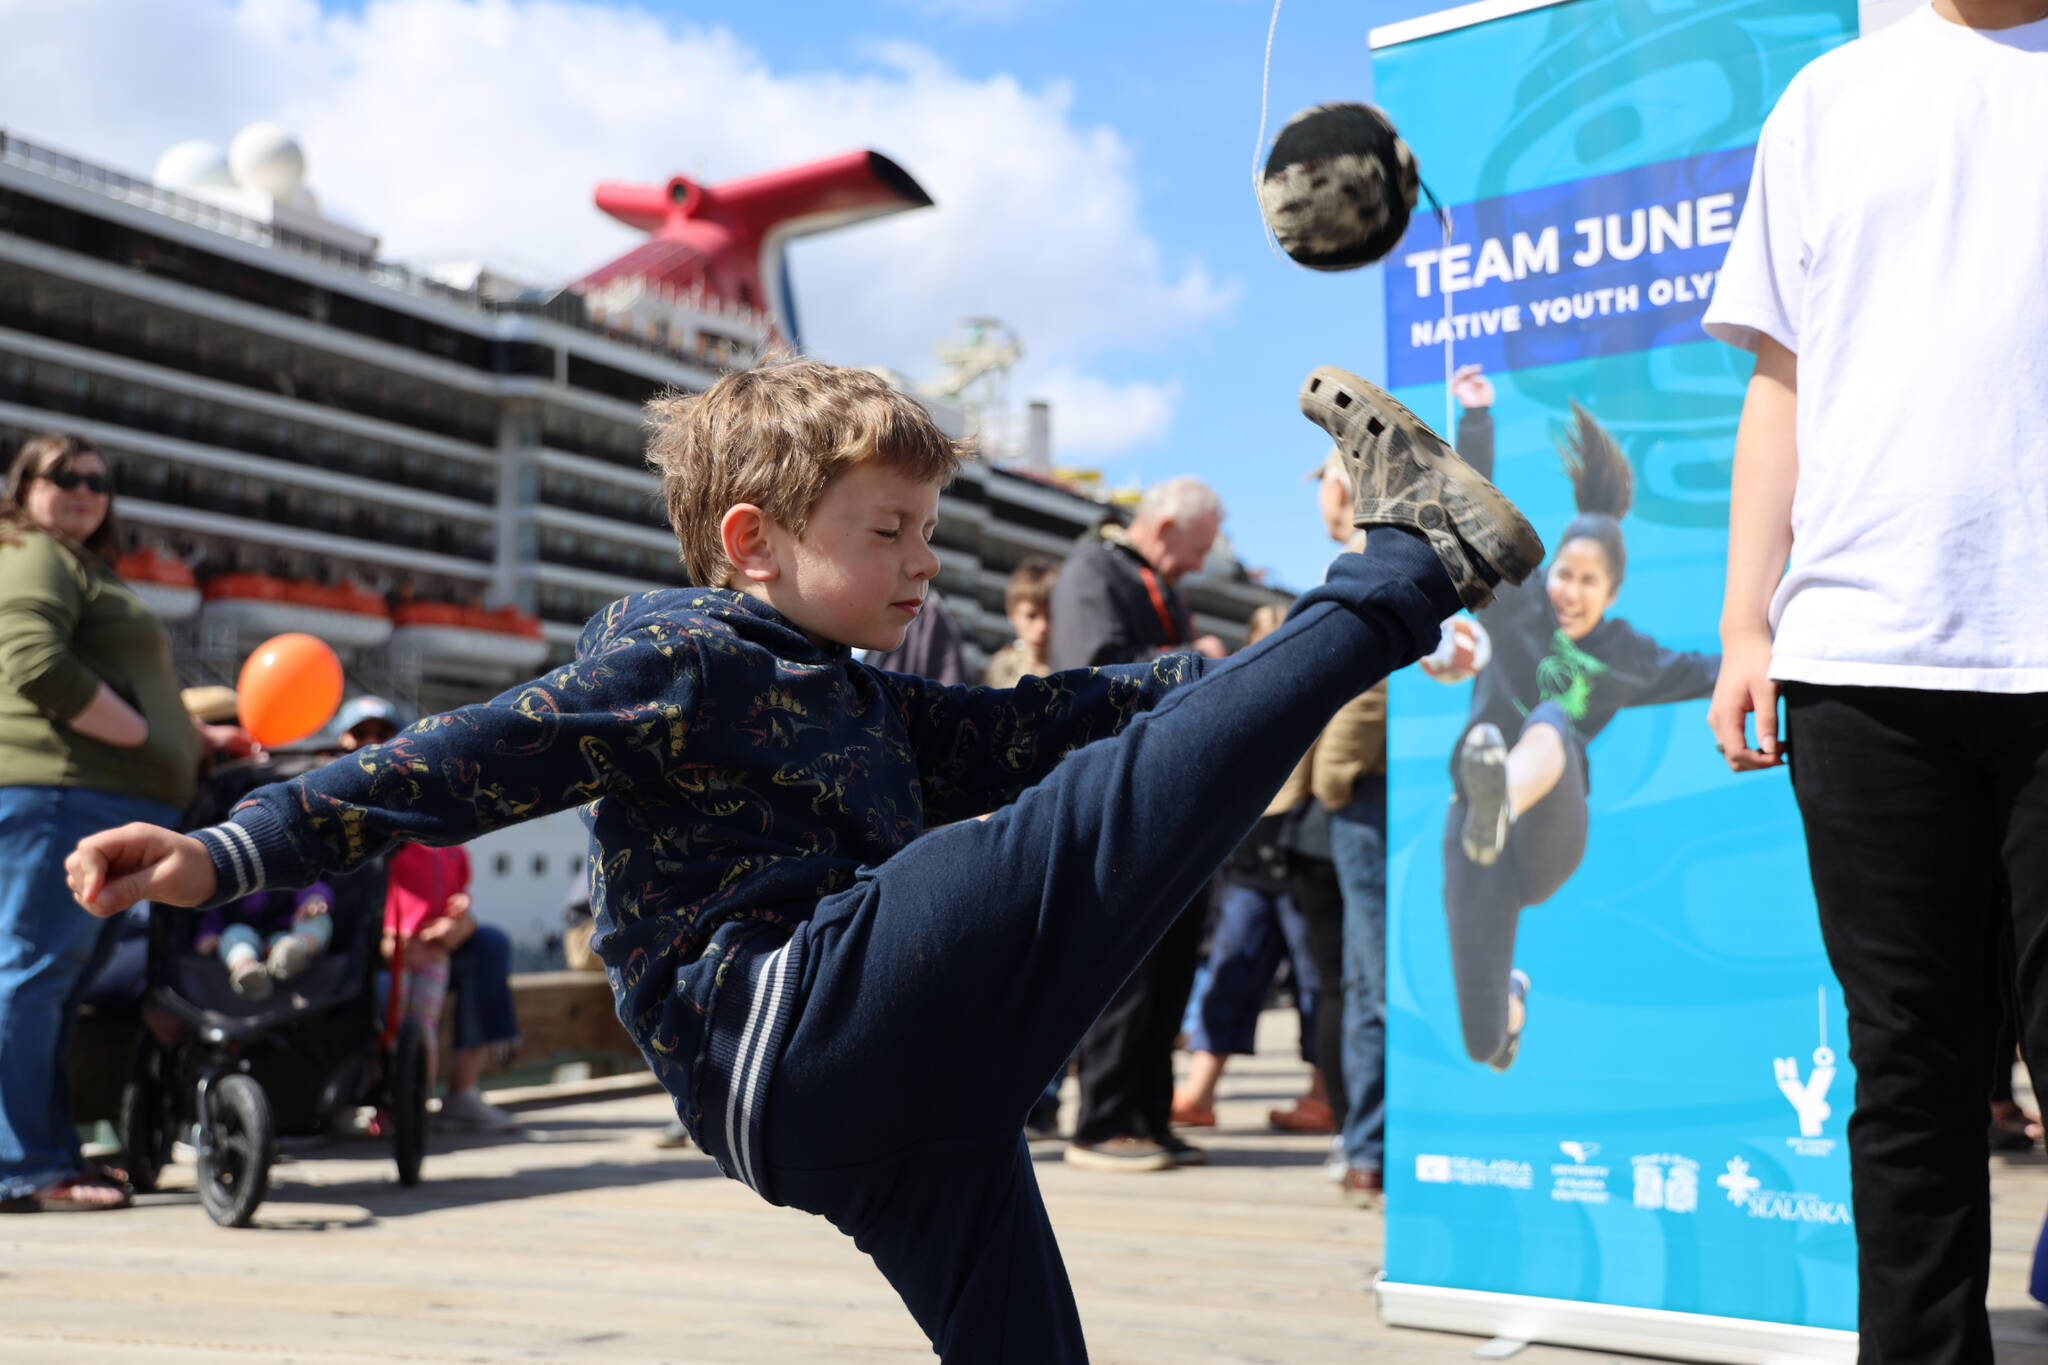 Garrison McNeill, 5, kicks high as he attempts the one-foot high kick at a booth hosted by the Team Juneau Native Group Olympics team. Coach Matthew Quinto said the group’s booth was set up to invite youth to try out the sport and learn more about the team. (Clarise Larson / Juneau Empire)